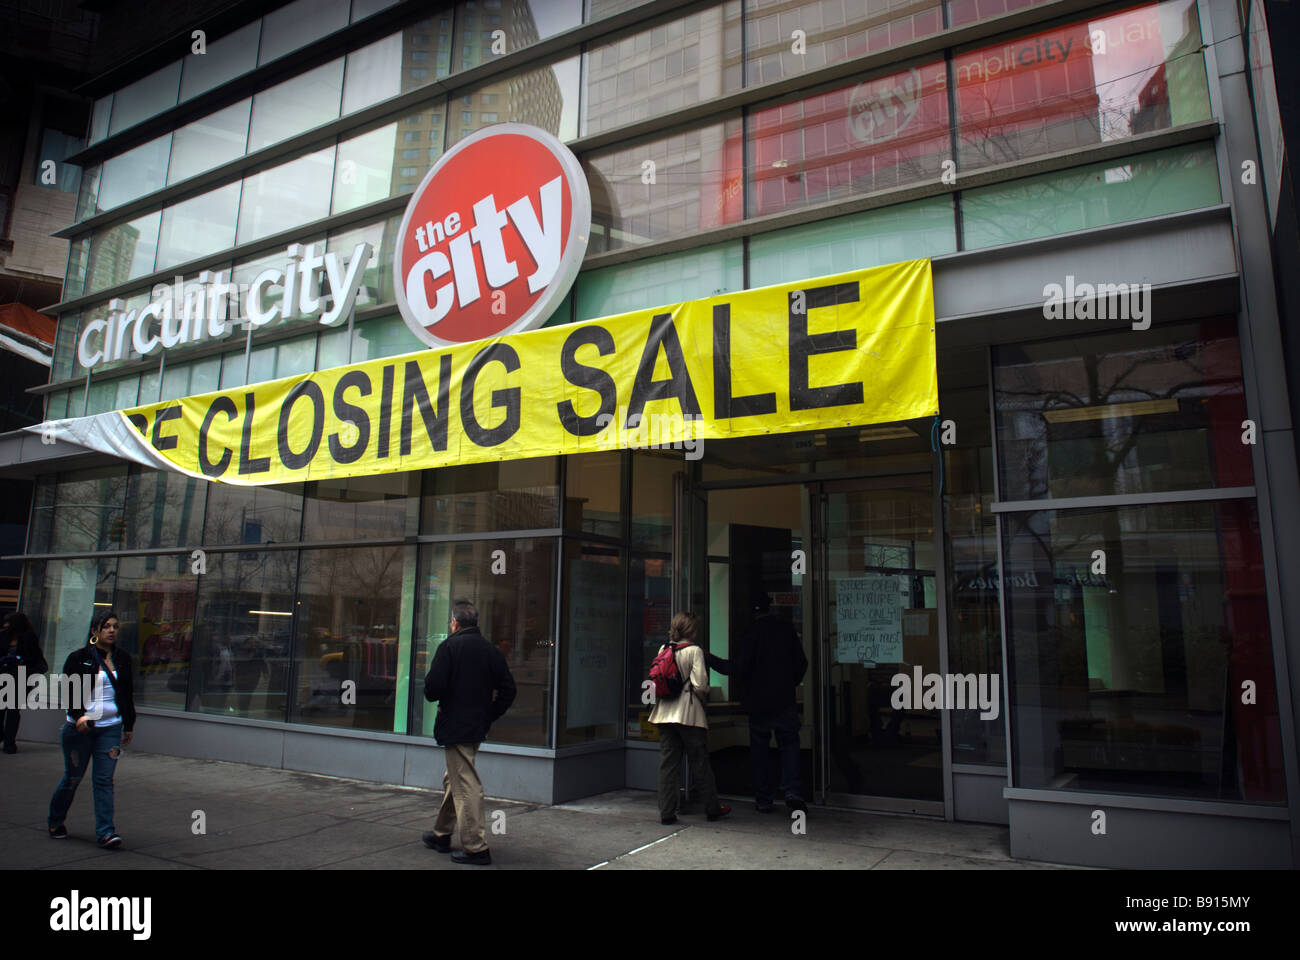 A going out of business sign is all that remains of a Circuit City electronics store Stock Photo